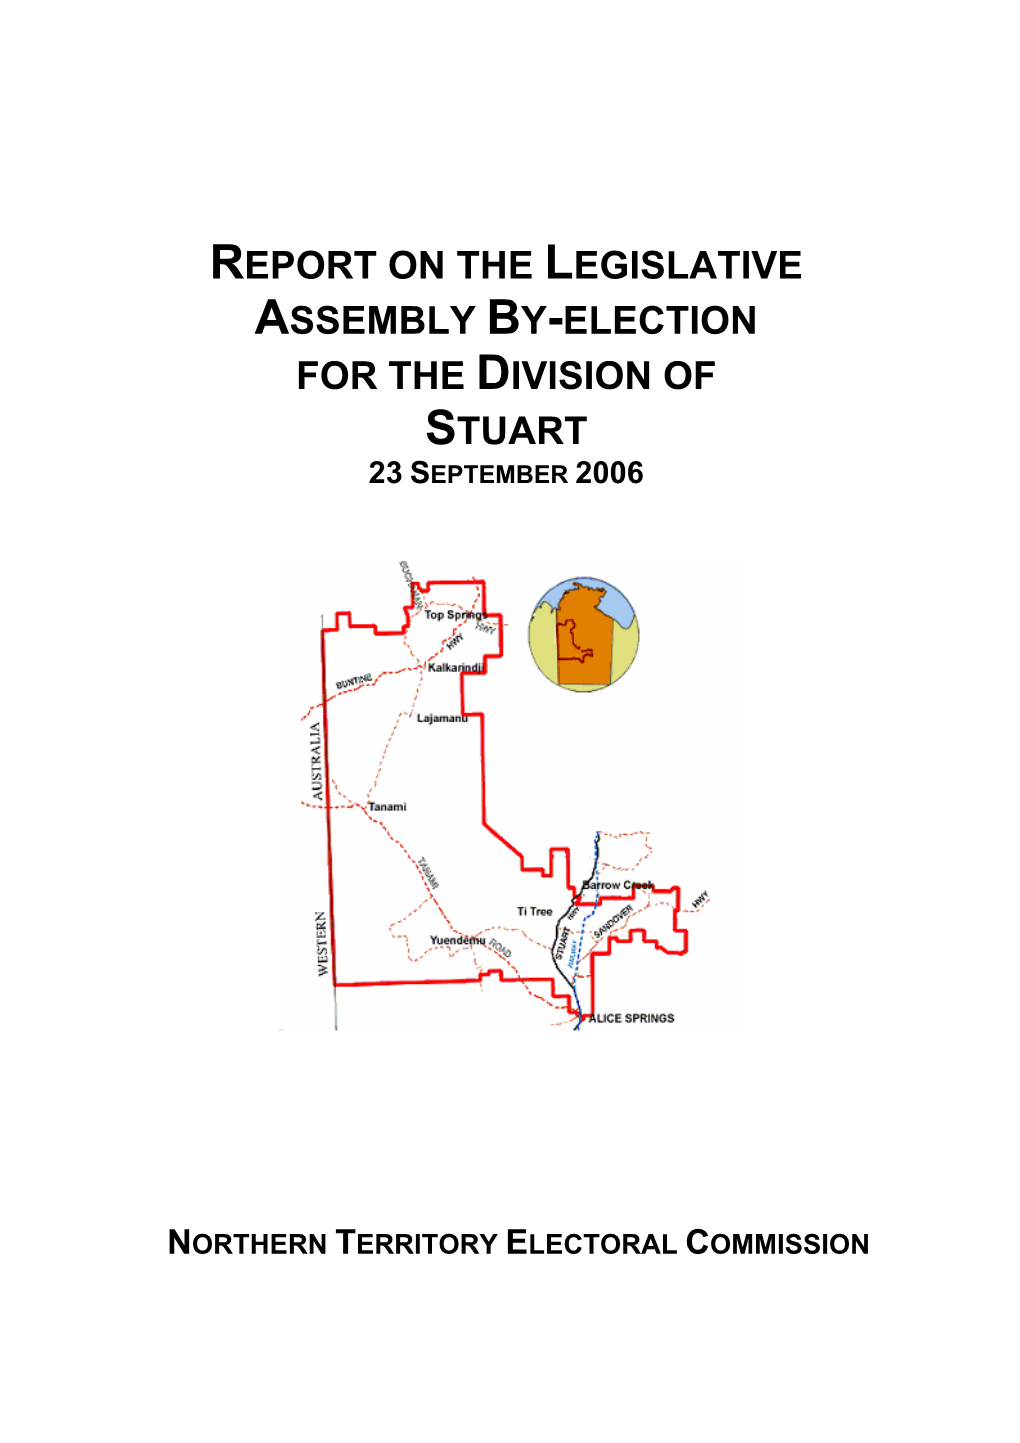 Report on the Legislative Assembly By-Election for the Division of Stuart 23 September 2006